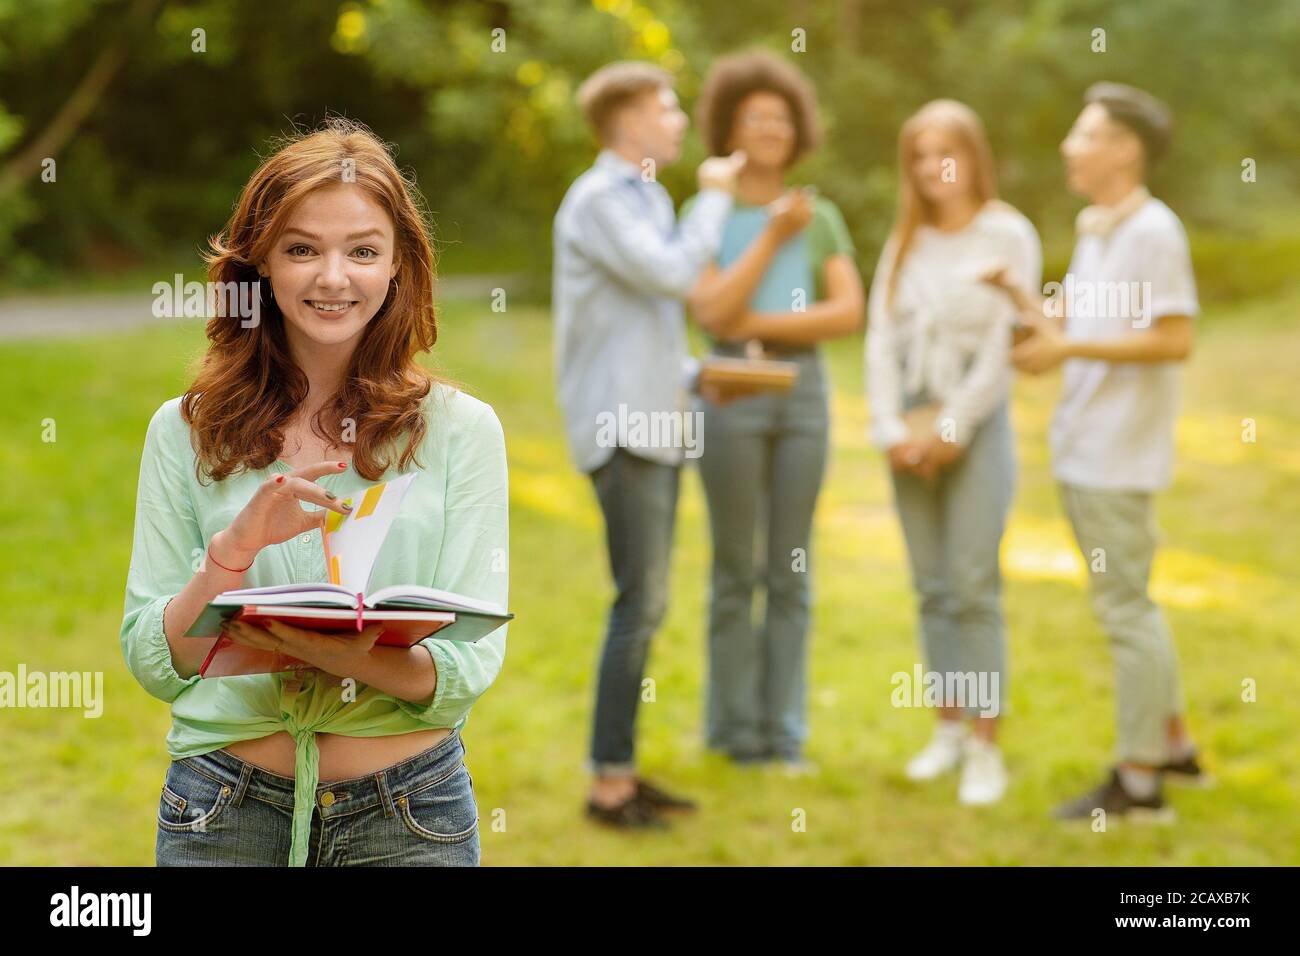 Portrait Of Smiling College Student Girl With Workbooks Posing Outdoors At Campus Stock Photo